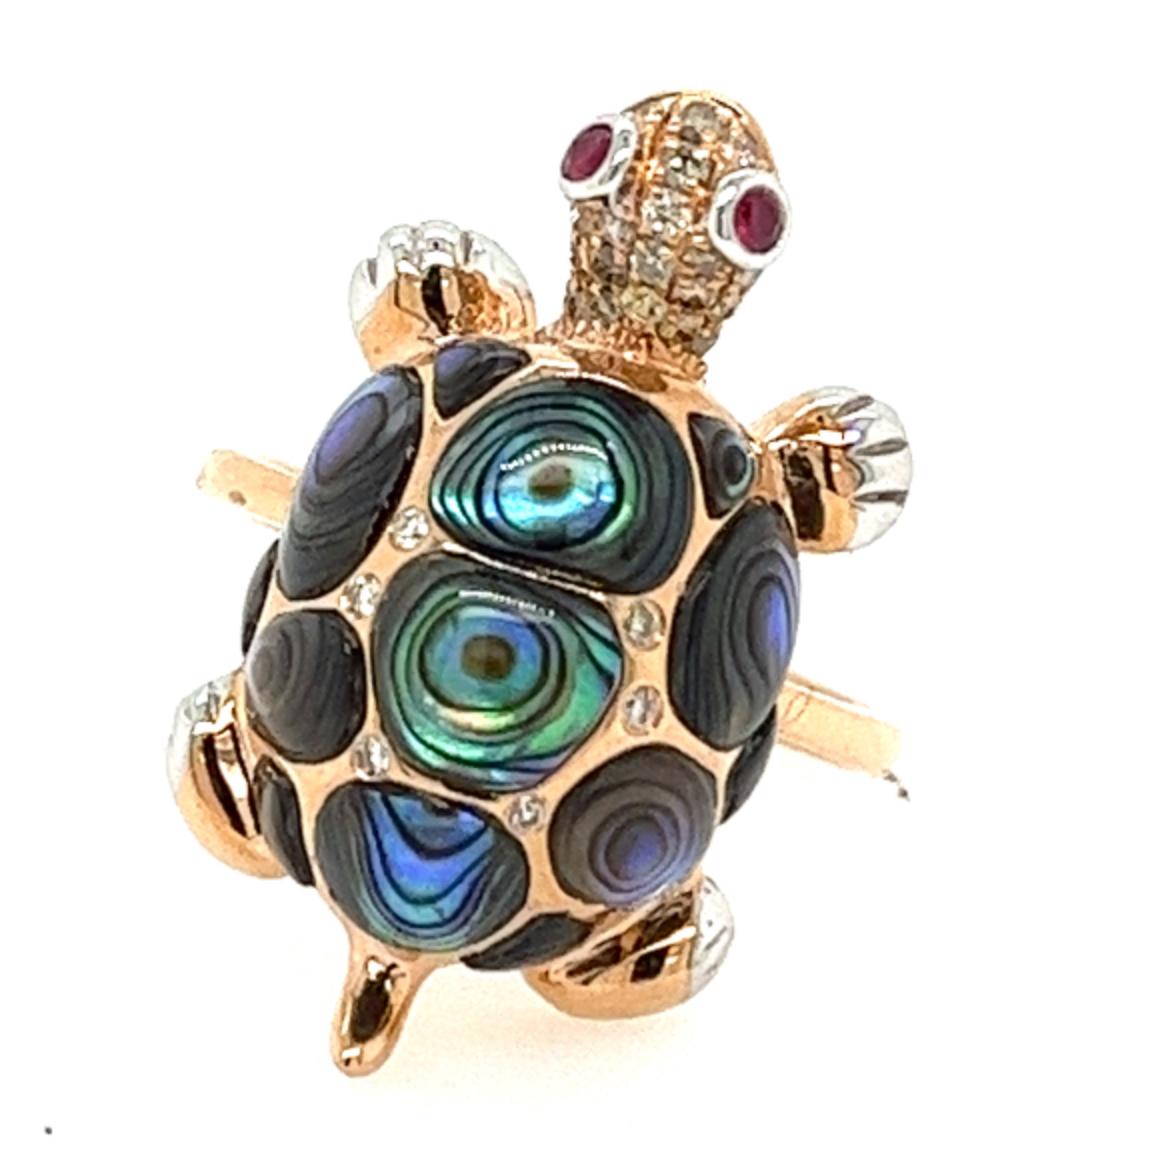 18K Gold Rose Gold Abalone Shell Turtle Ring with Diamonds

13 Abalone Shell - 2.55 CT
31 Diamonds - 0.19 CT
2 Rubies - 0.04 CT
18K Rose Gold - 7.02 GM

This captivating ring is a true work of art, blending the timeless elegance of 18K rose gold